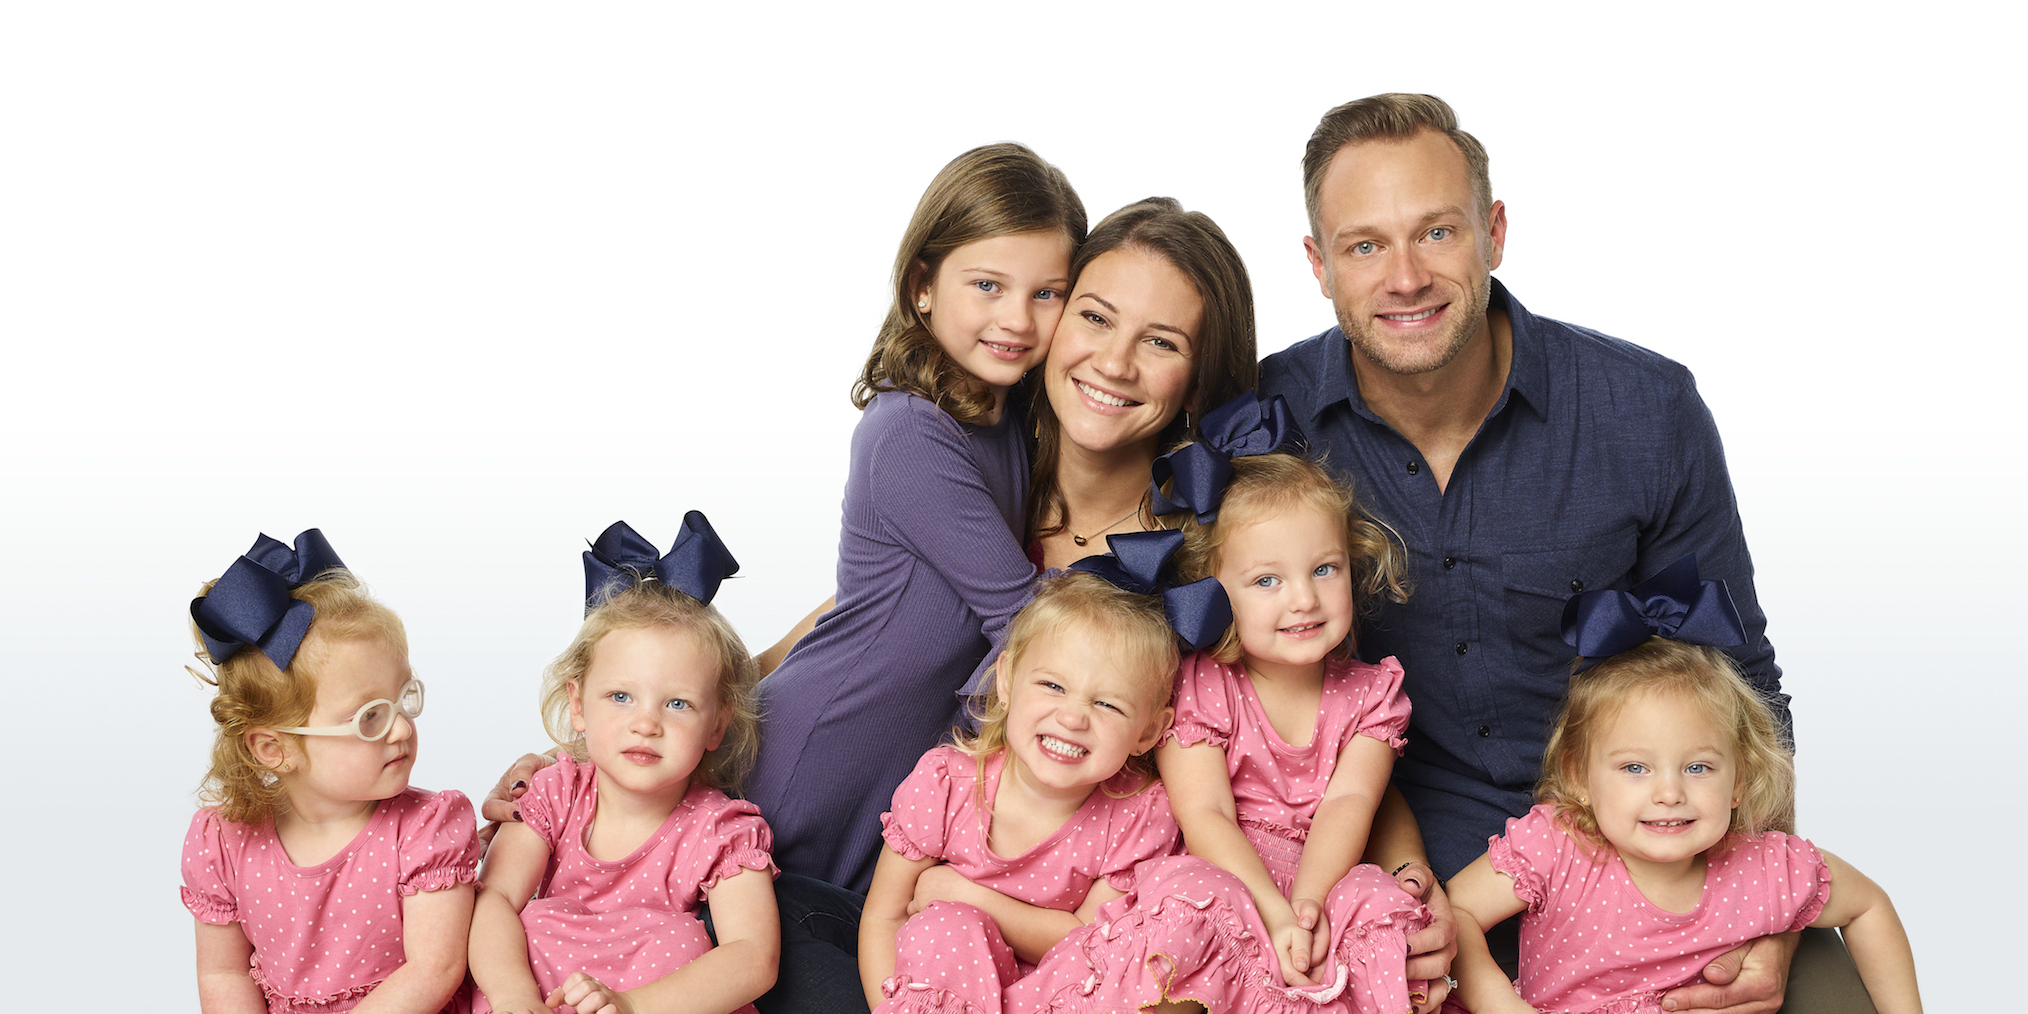 Since its inception in 2016, TLC’s family reality show ‘OutDaughtered’ has ...